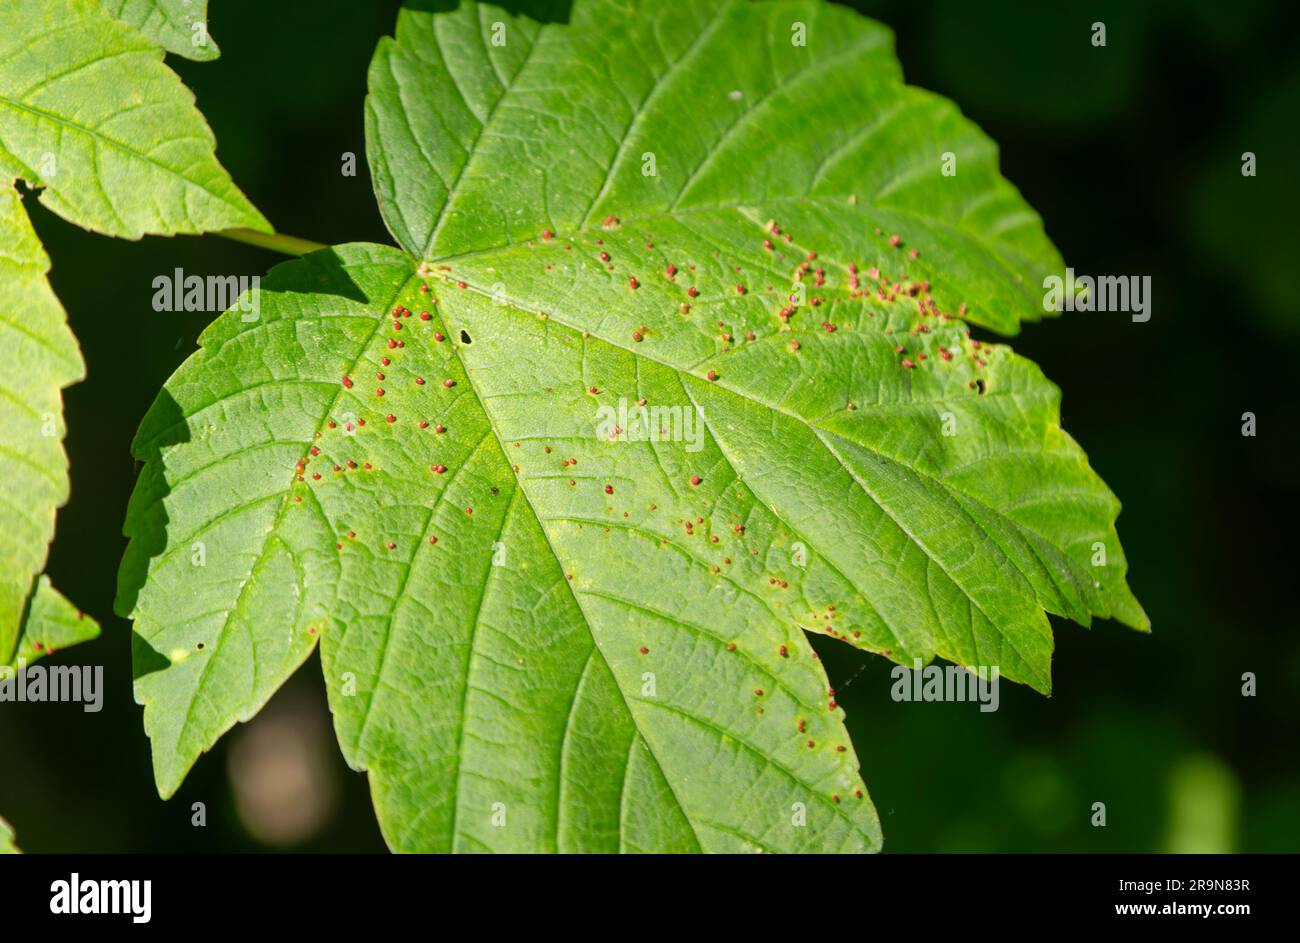 Gall mites 'Aceria cephalonea' on leaf of sycamore tree 'Acer pseudoplatanus', Suffolk, England, UK Stock Photo